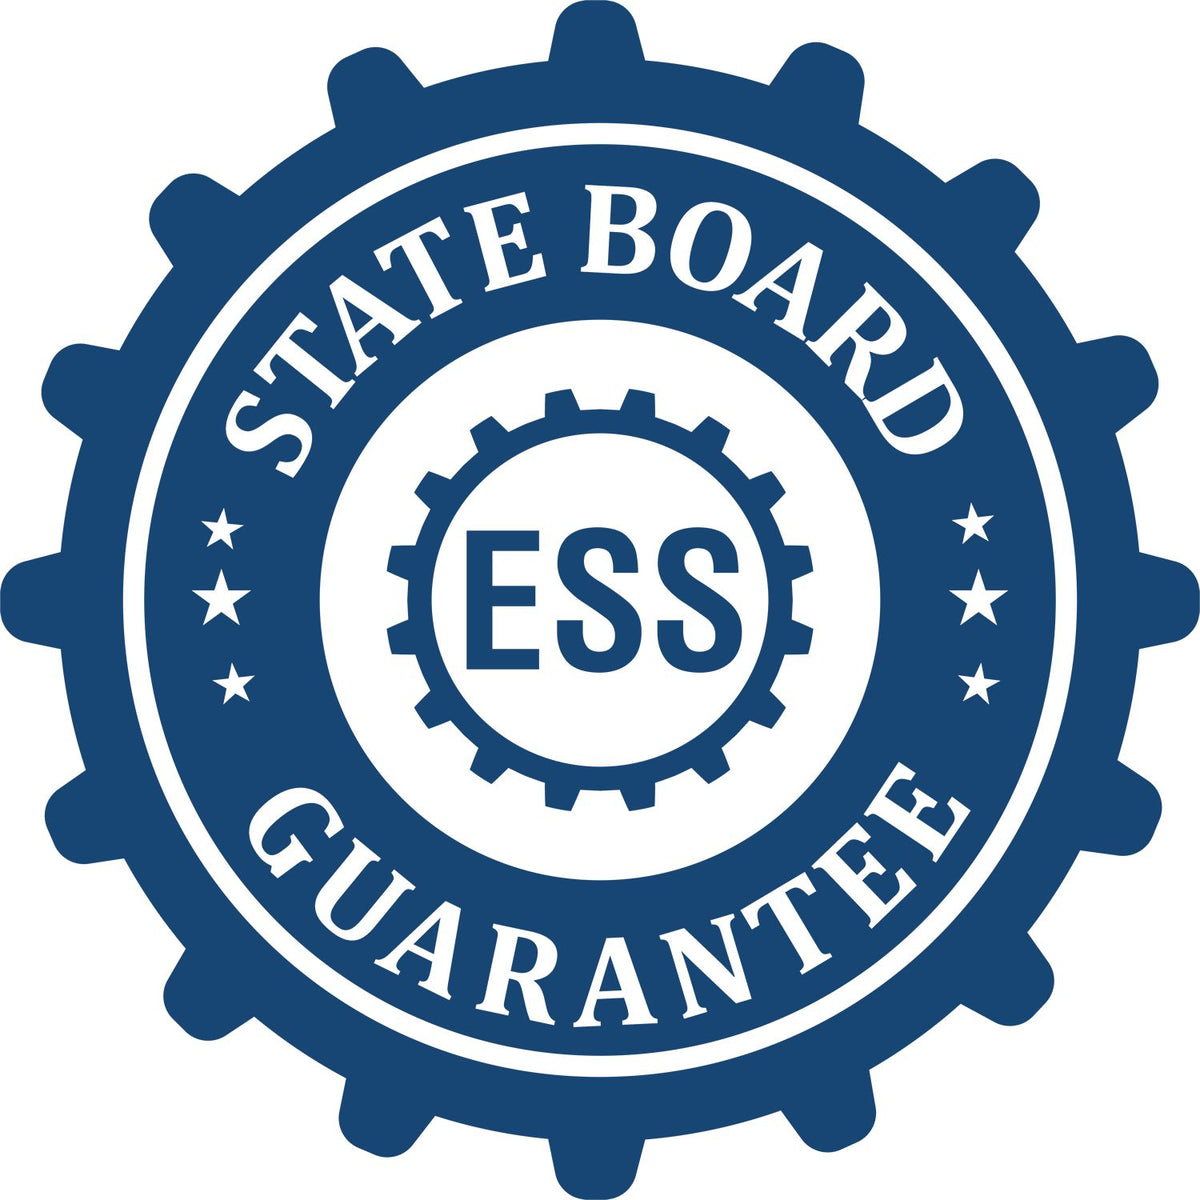 An emblem in a gear shape illustrating a state board guarantee for the Gift New Jersey Land Surveyor Seal